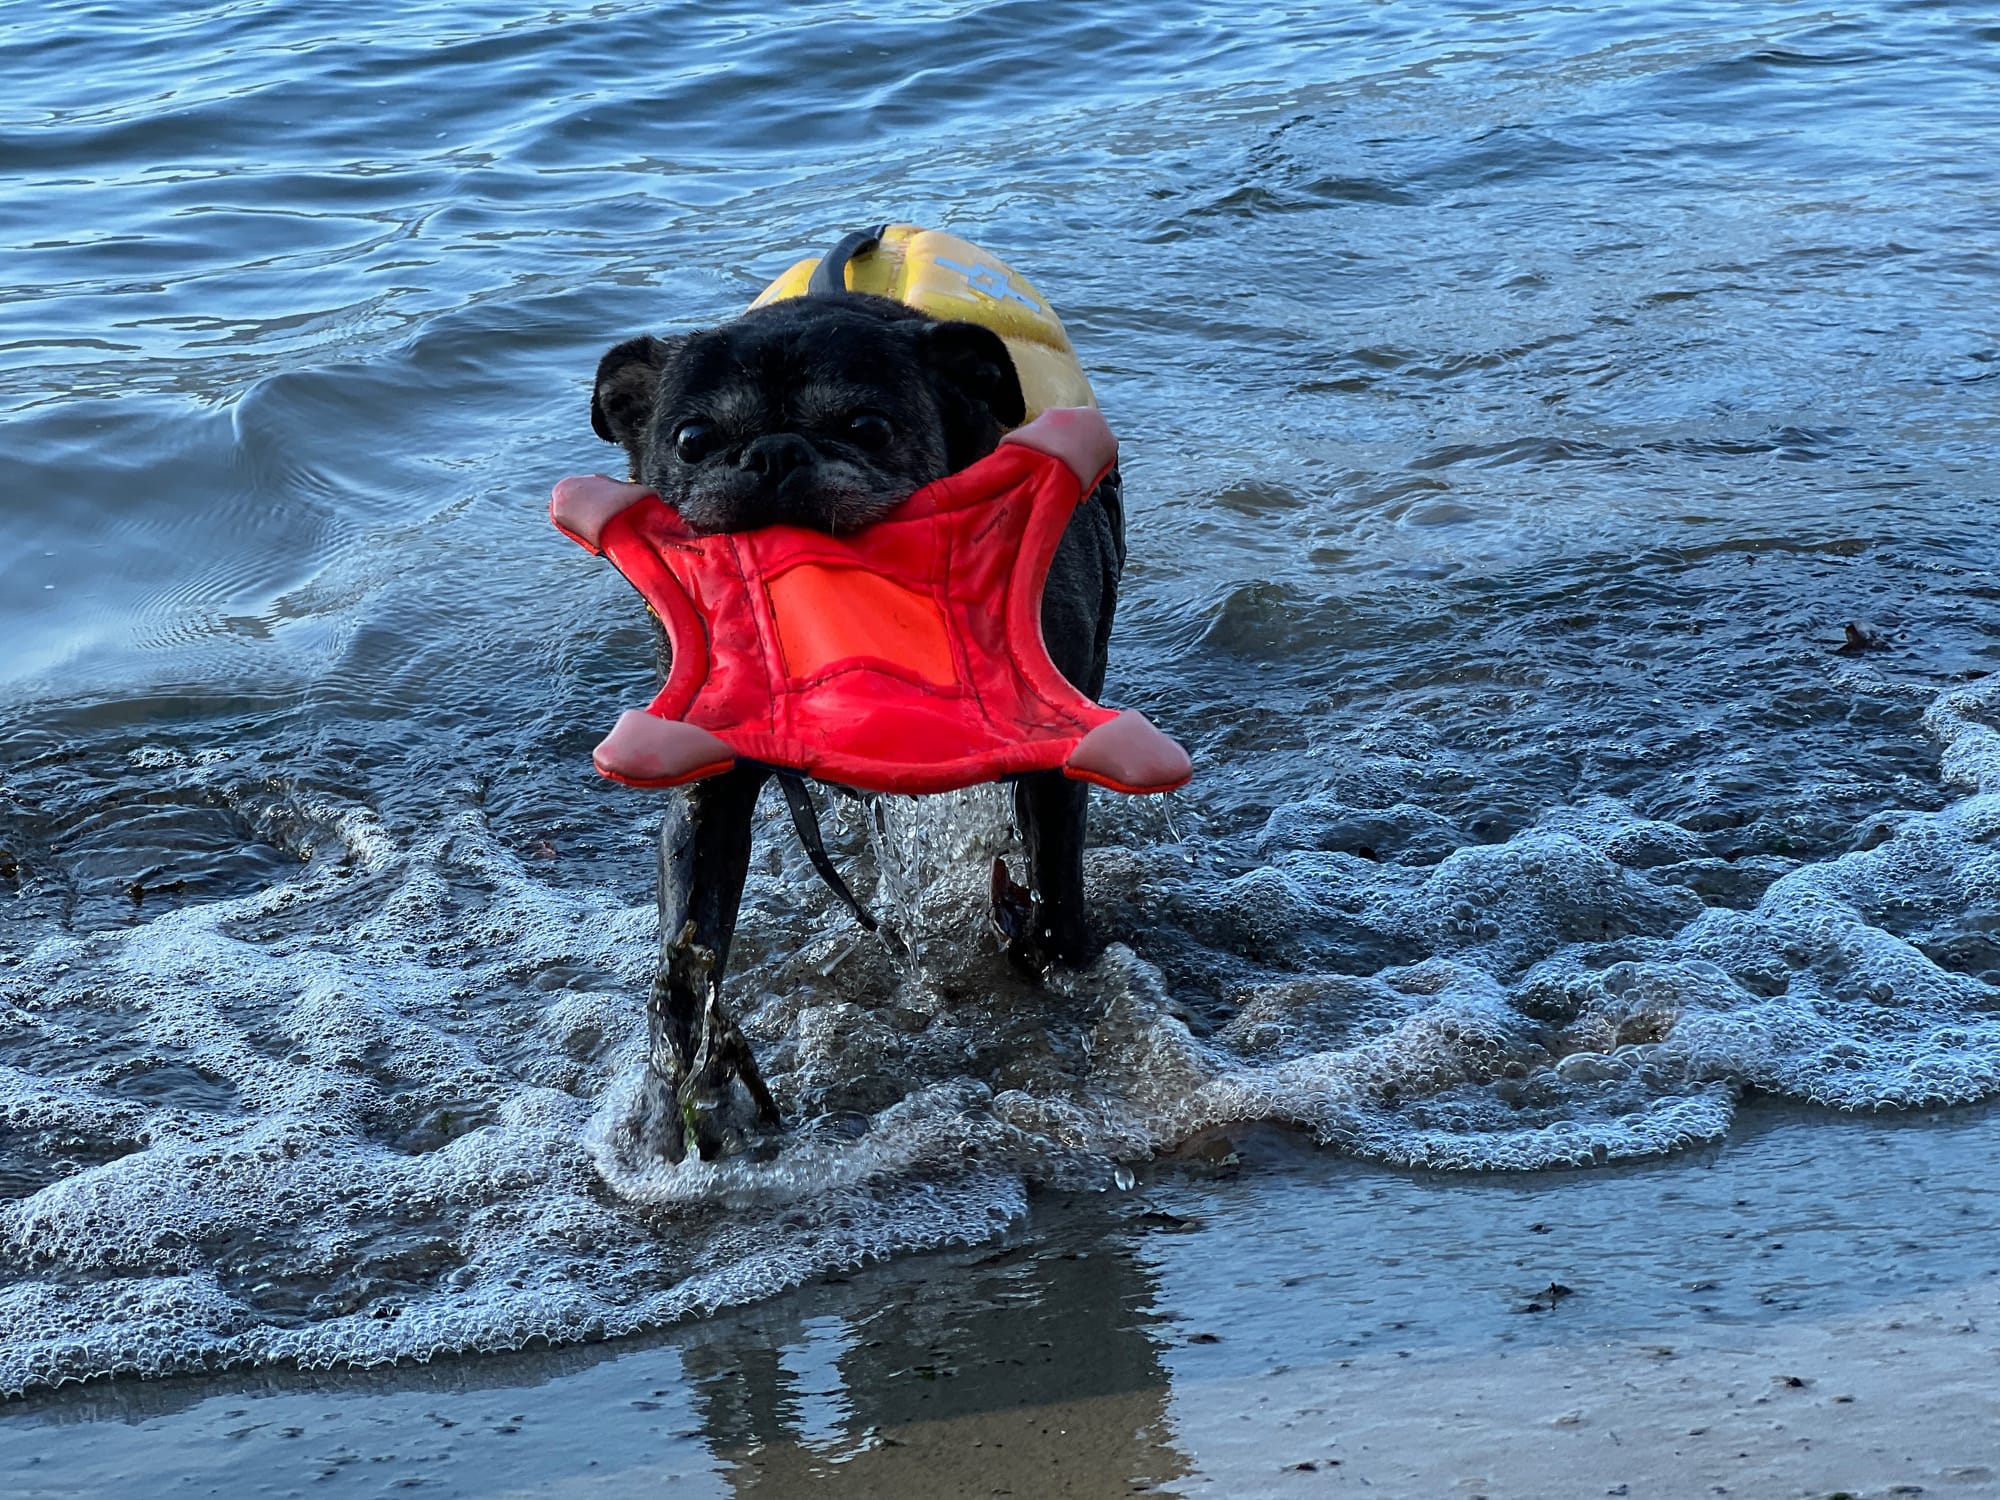 Zoe retrieving a toy from the ocean